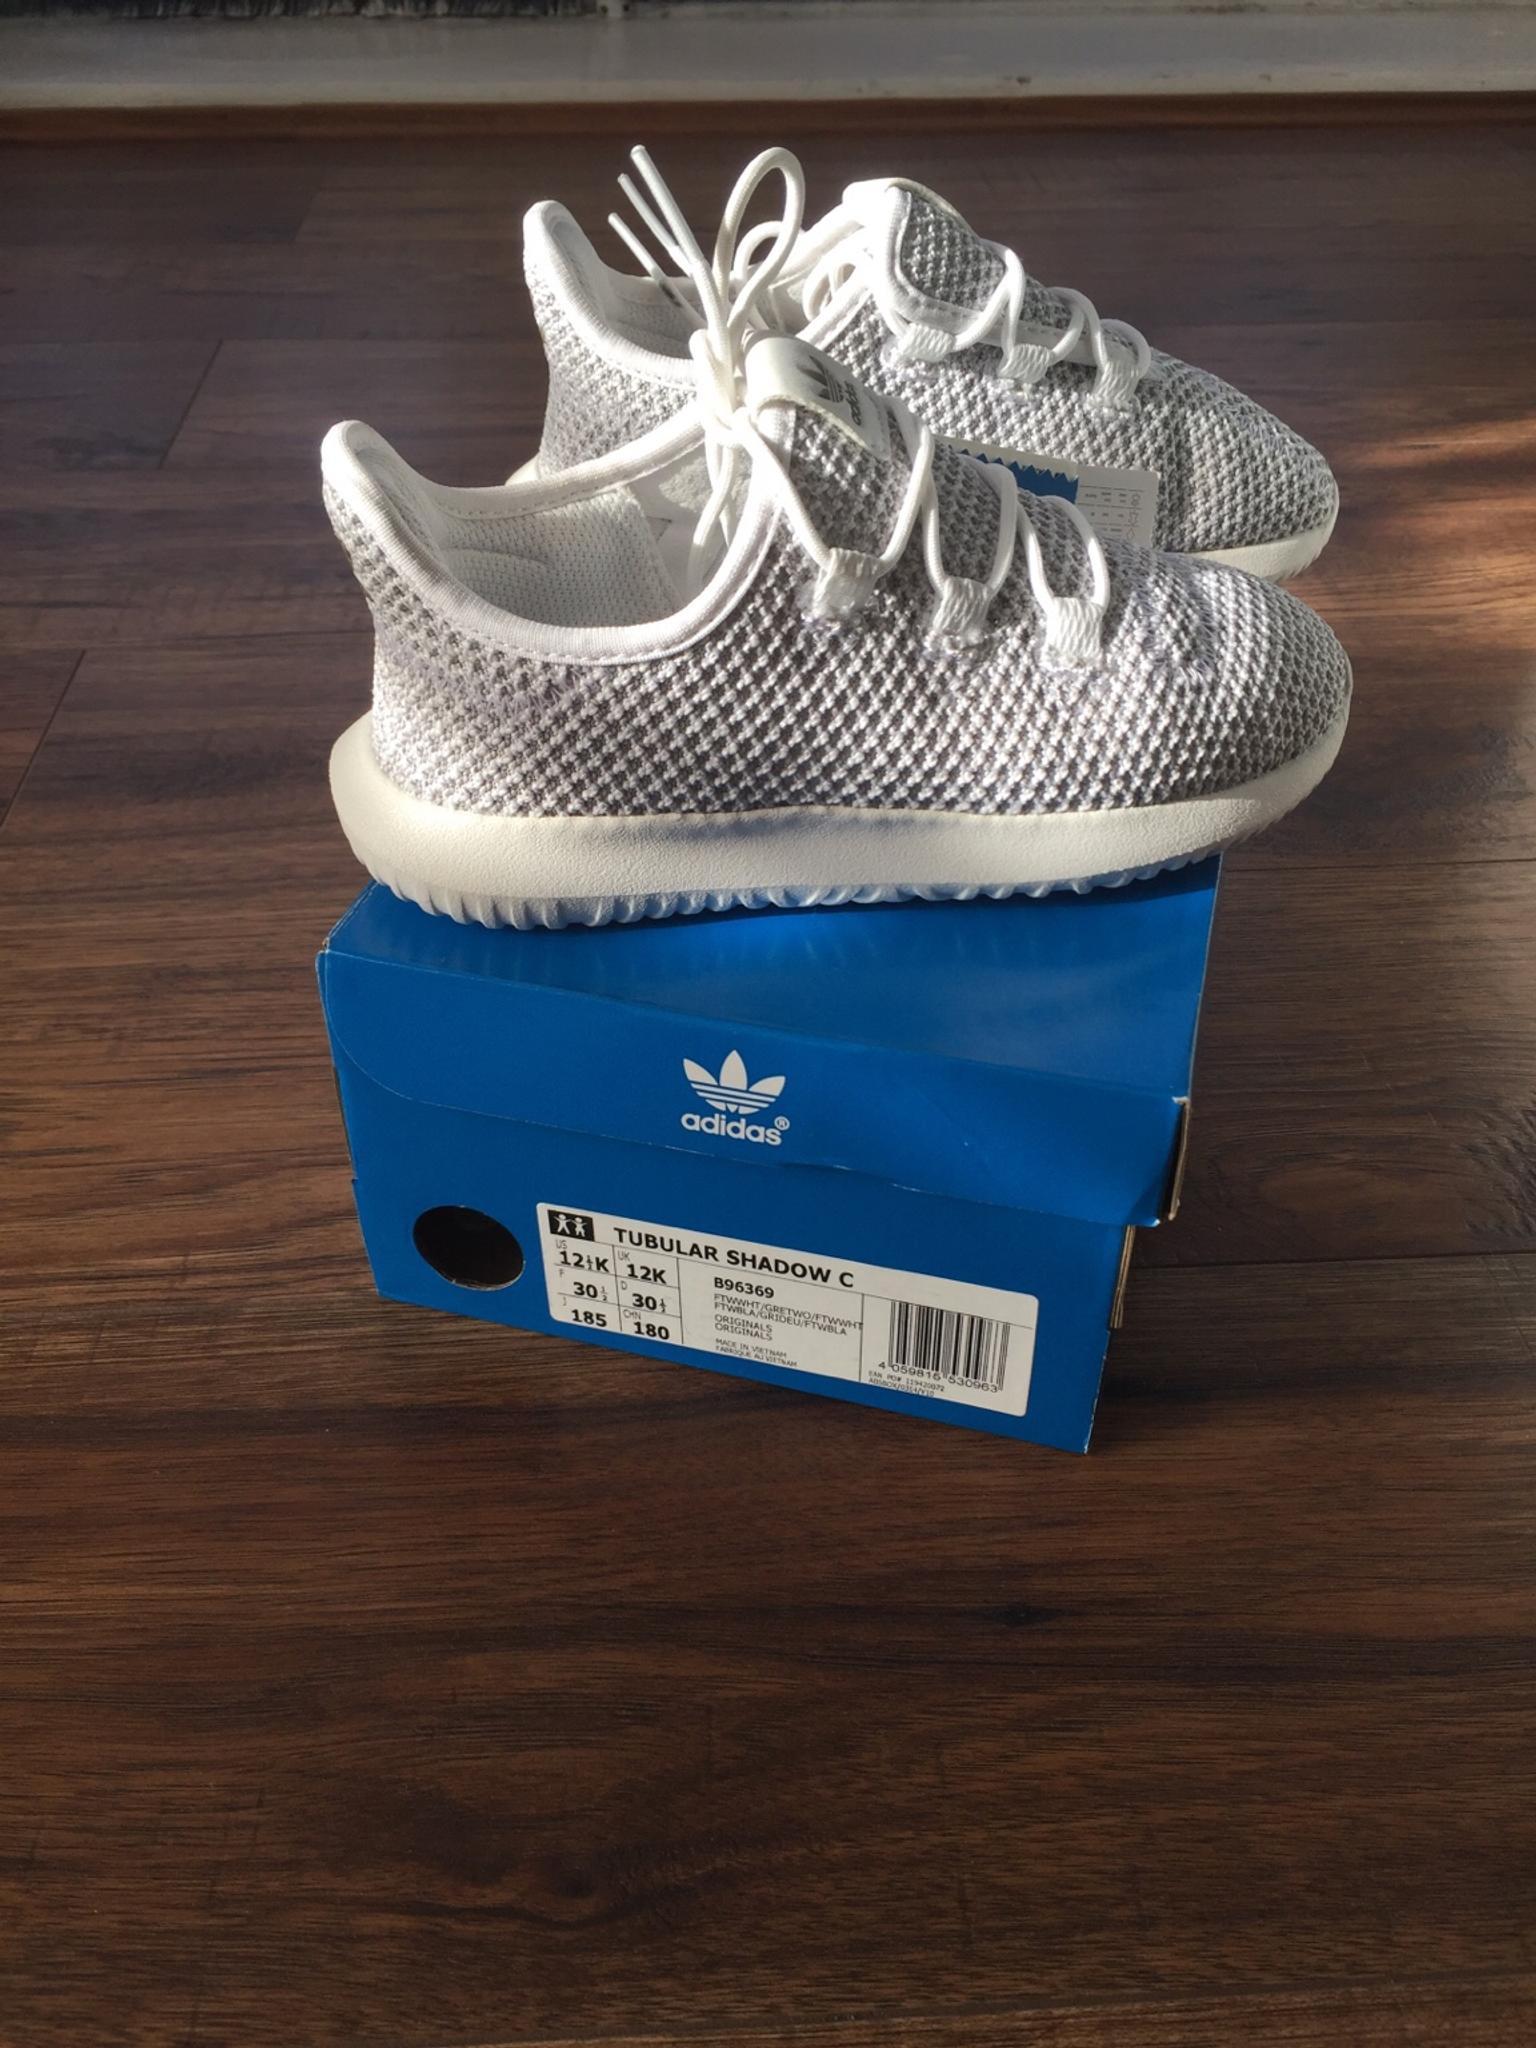 adidas trainers size 12